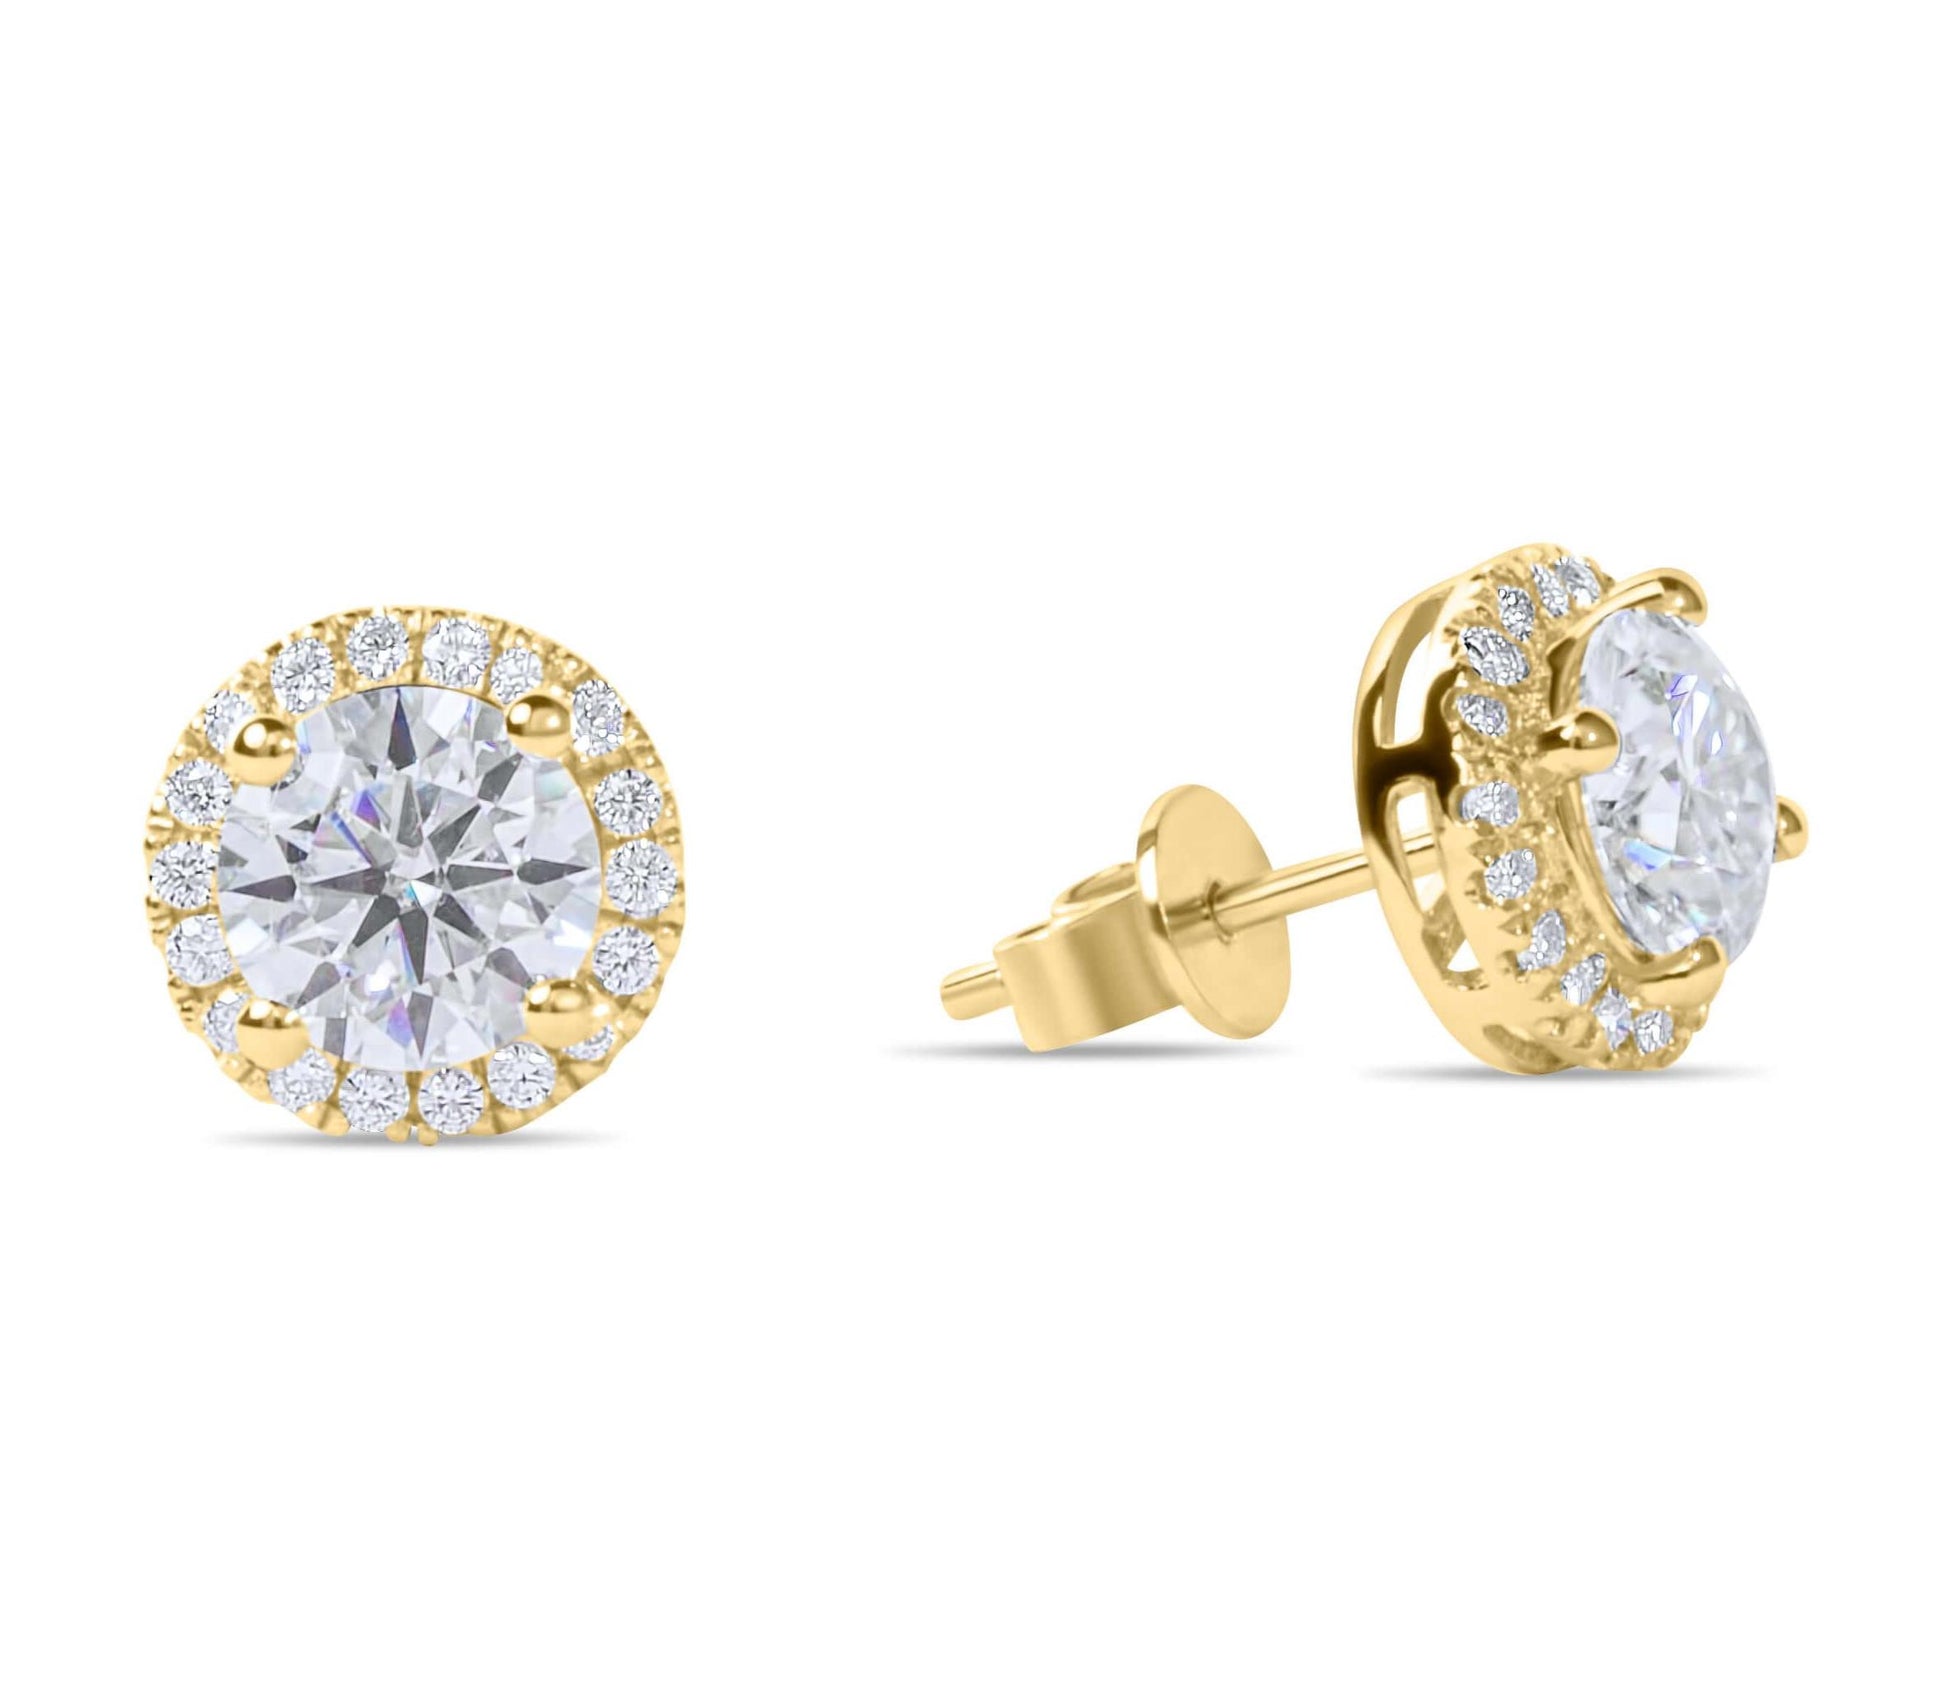 Moissanite Diamond Gold Earrings with Surrounding small stones on white background